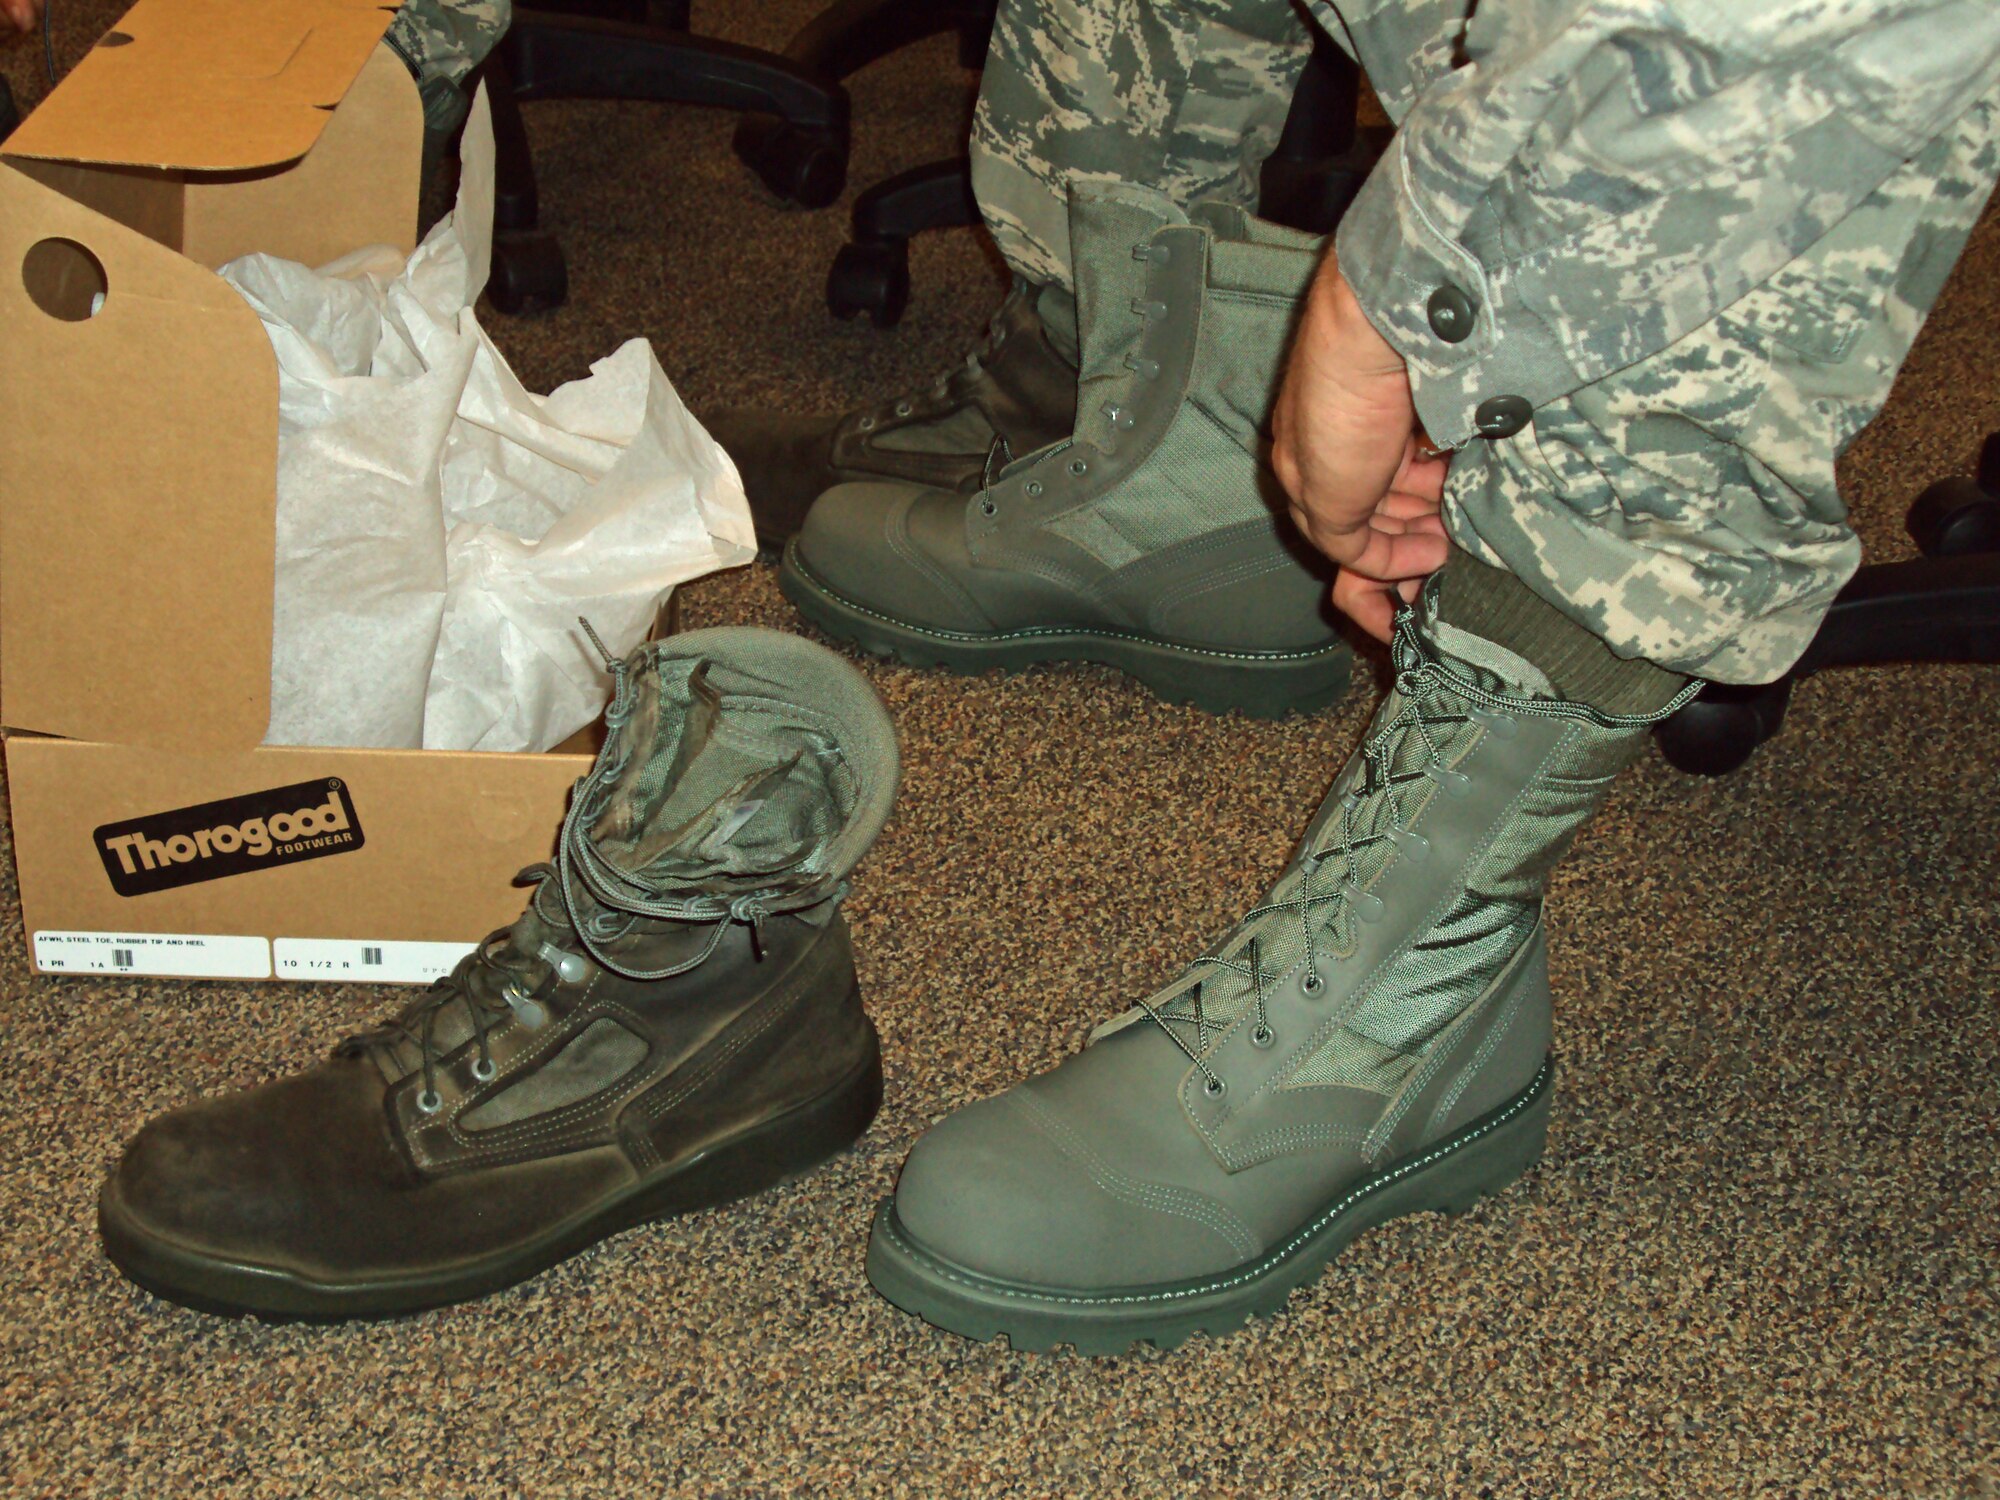 Air Force officials announced findings Jan. 28, 2010 of the recent Airman Battle Uniform boot wear test.  Pictured at right is the boot of choice with a rubber coated toe and heel. Research began to develop a stain-resistant boot to overcome issues with the current suede sage green boot, pictured at left. The Air Force Uniform Office, part of the Aeronautical Systems Center at Wright-Patterson Air Force Base, Ohio, oversaw testing.  (U.S. Air Force photo by Brad Jessmer)
